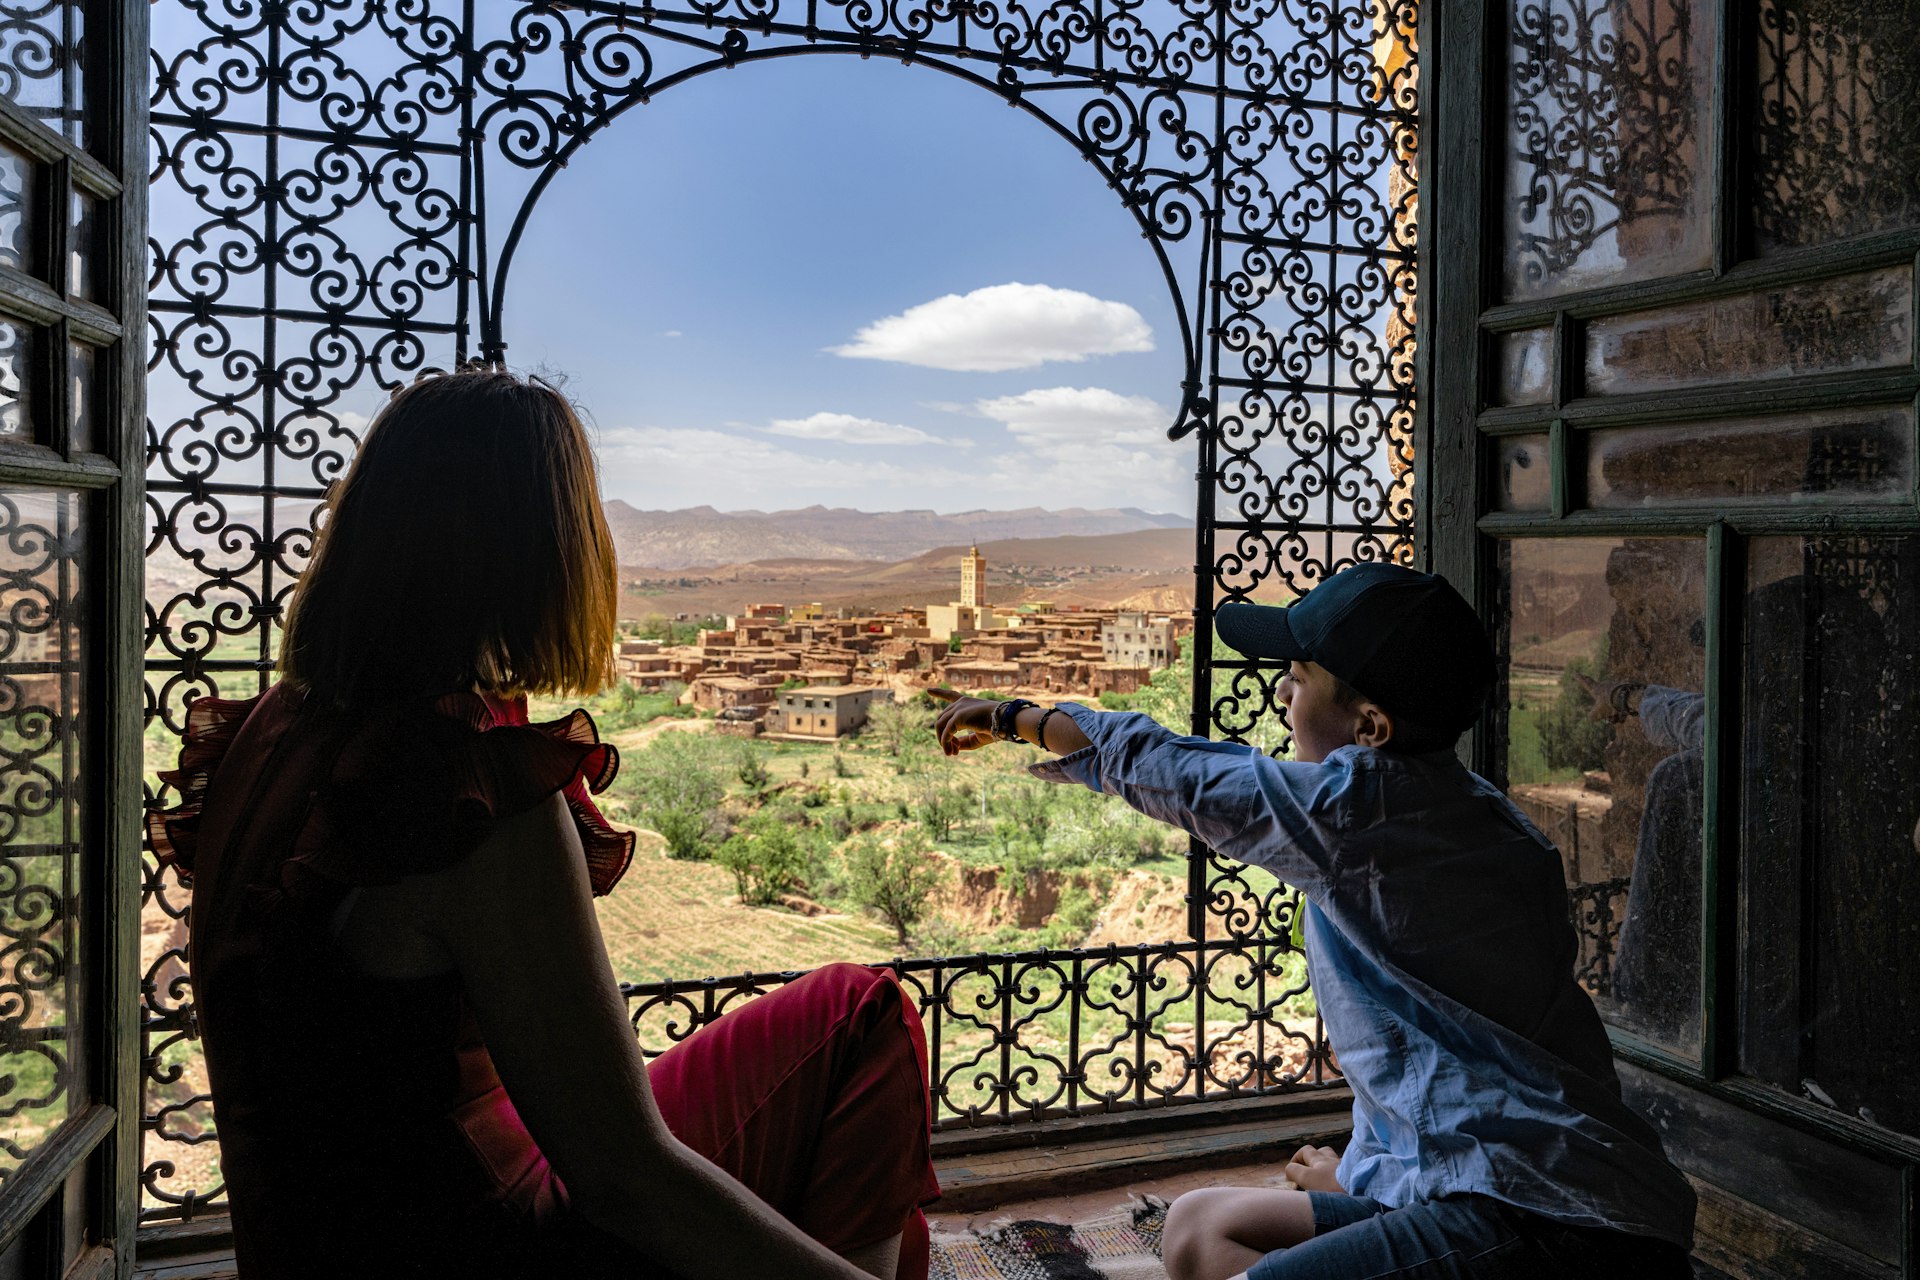 A boy and his mother admiring the famous Telouet Kasbah in the High Atlas mountains, Morocco